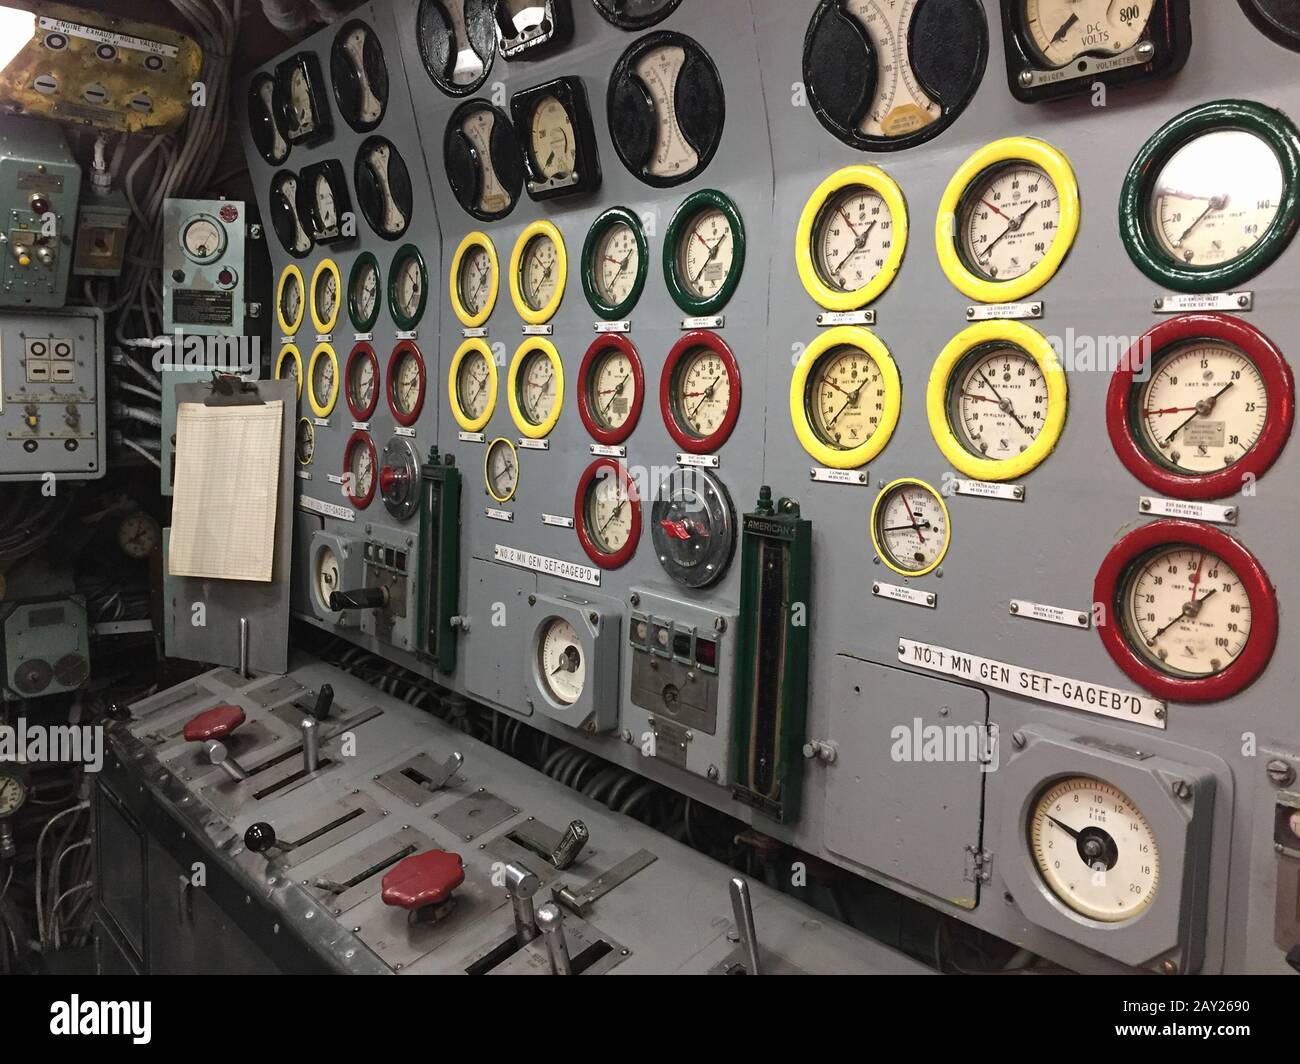 New York, USA - August 20, 2018: Interiors of the USS Growler SSG-57. Exhibit Intrepid Sea, Air and Space Museum. Stock Photo